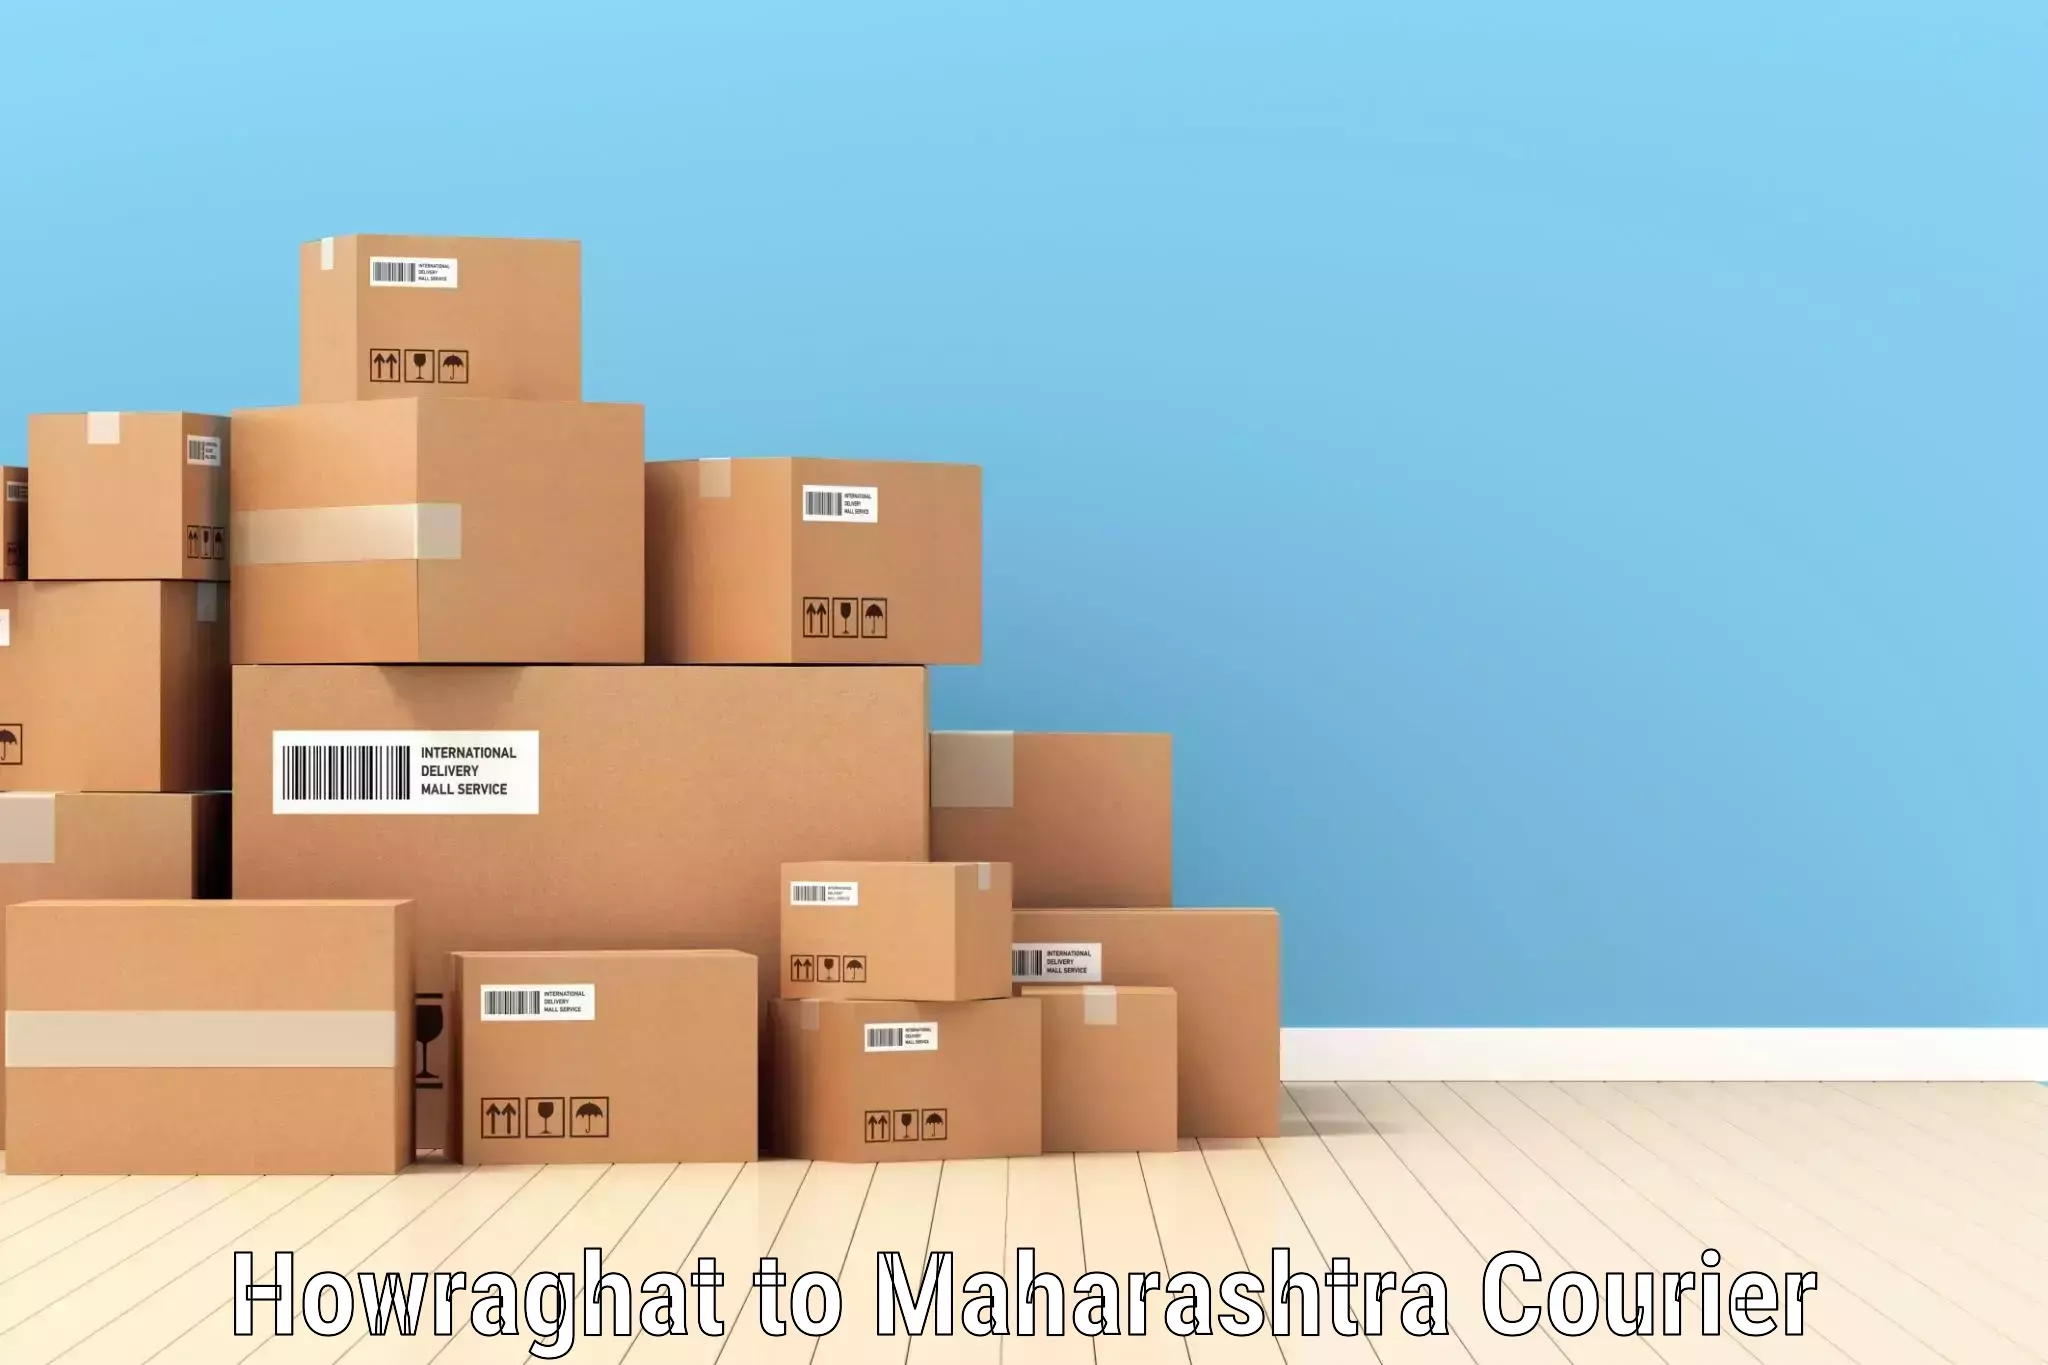 Large package courier in Howraghat to Shirpur